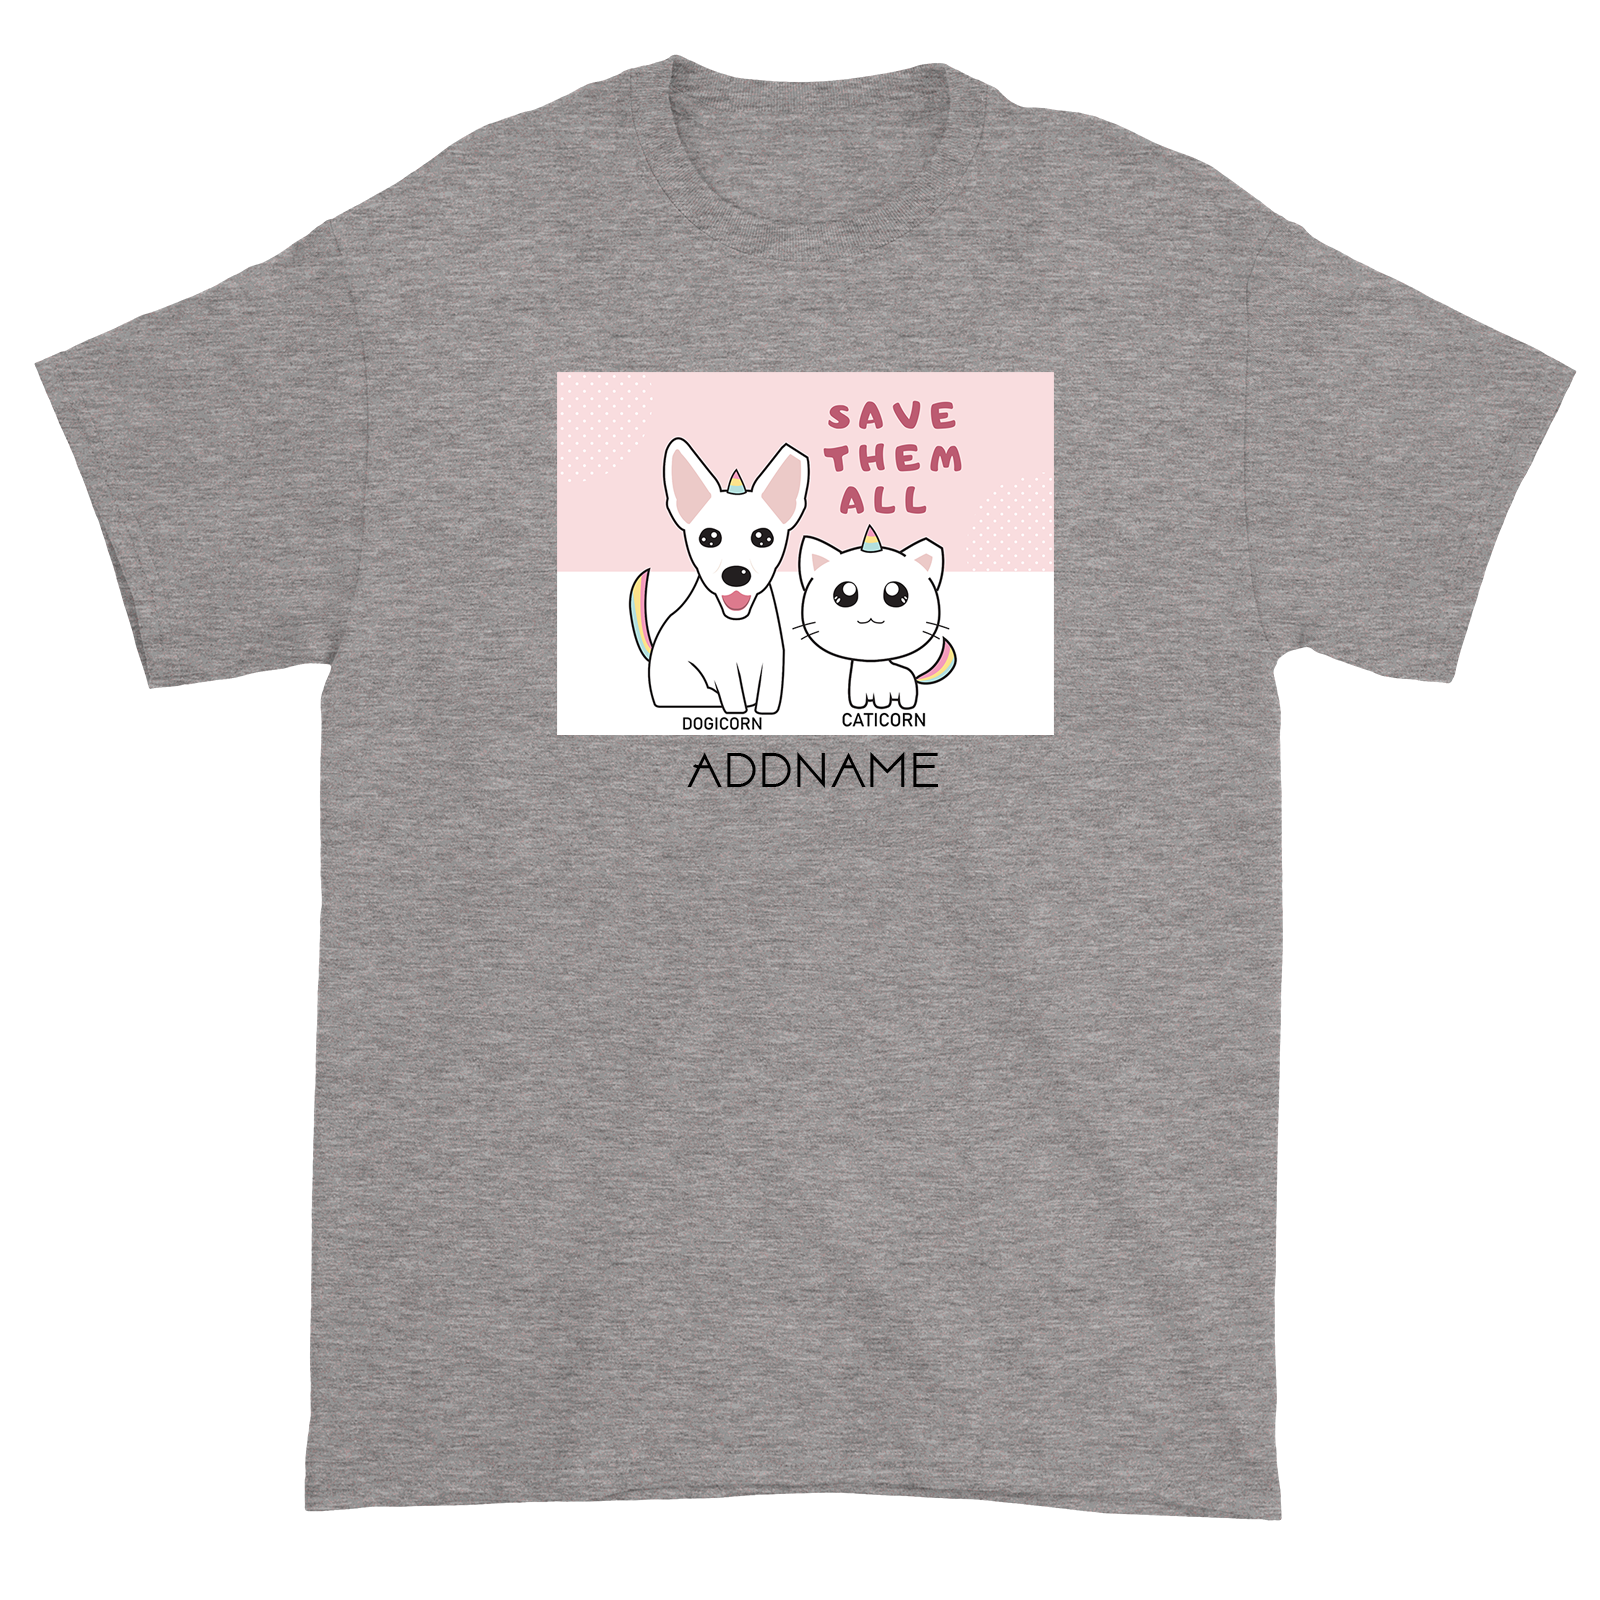 Sherlyn Mama Cute Mix Dogicorn and Caticorn Accessories Addname Unisex T-Shirt